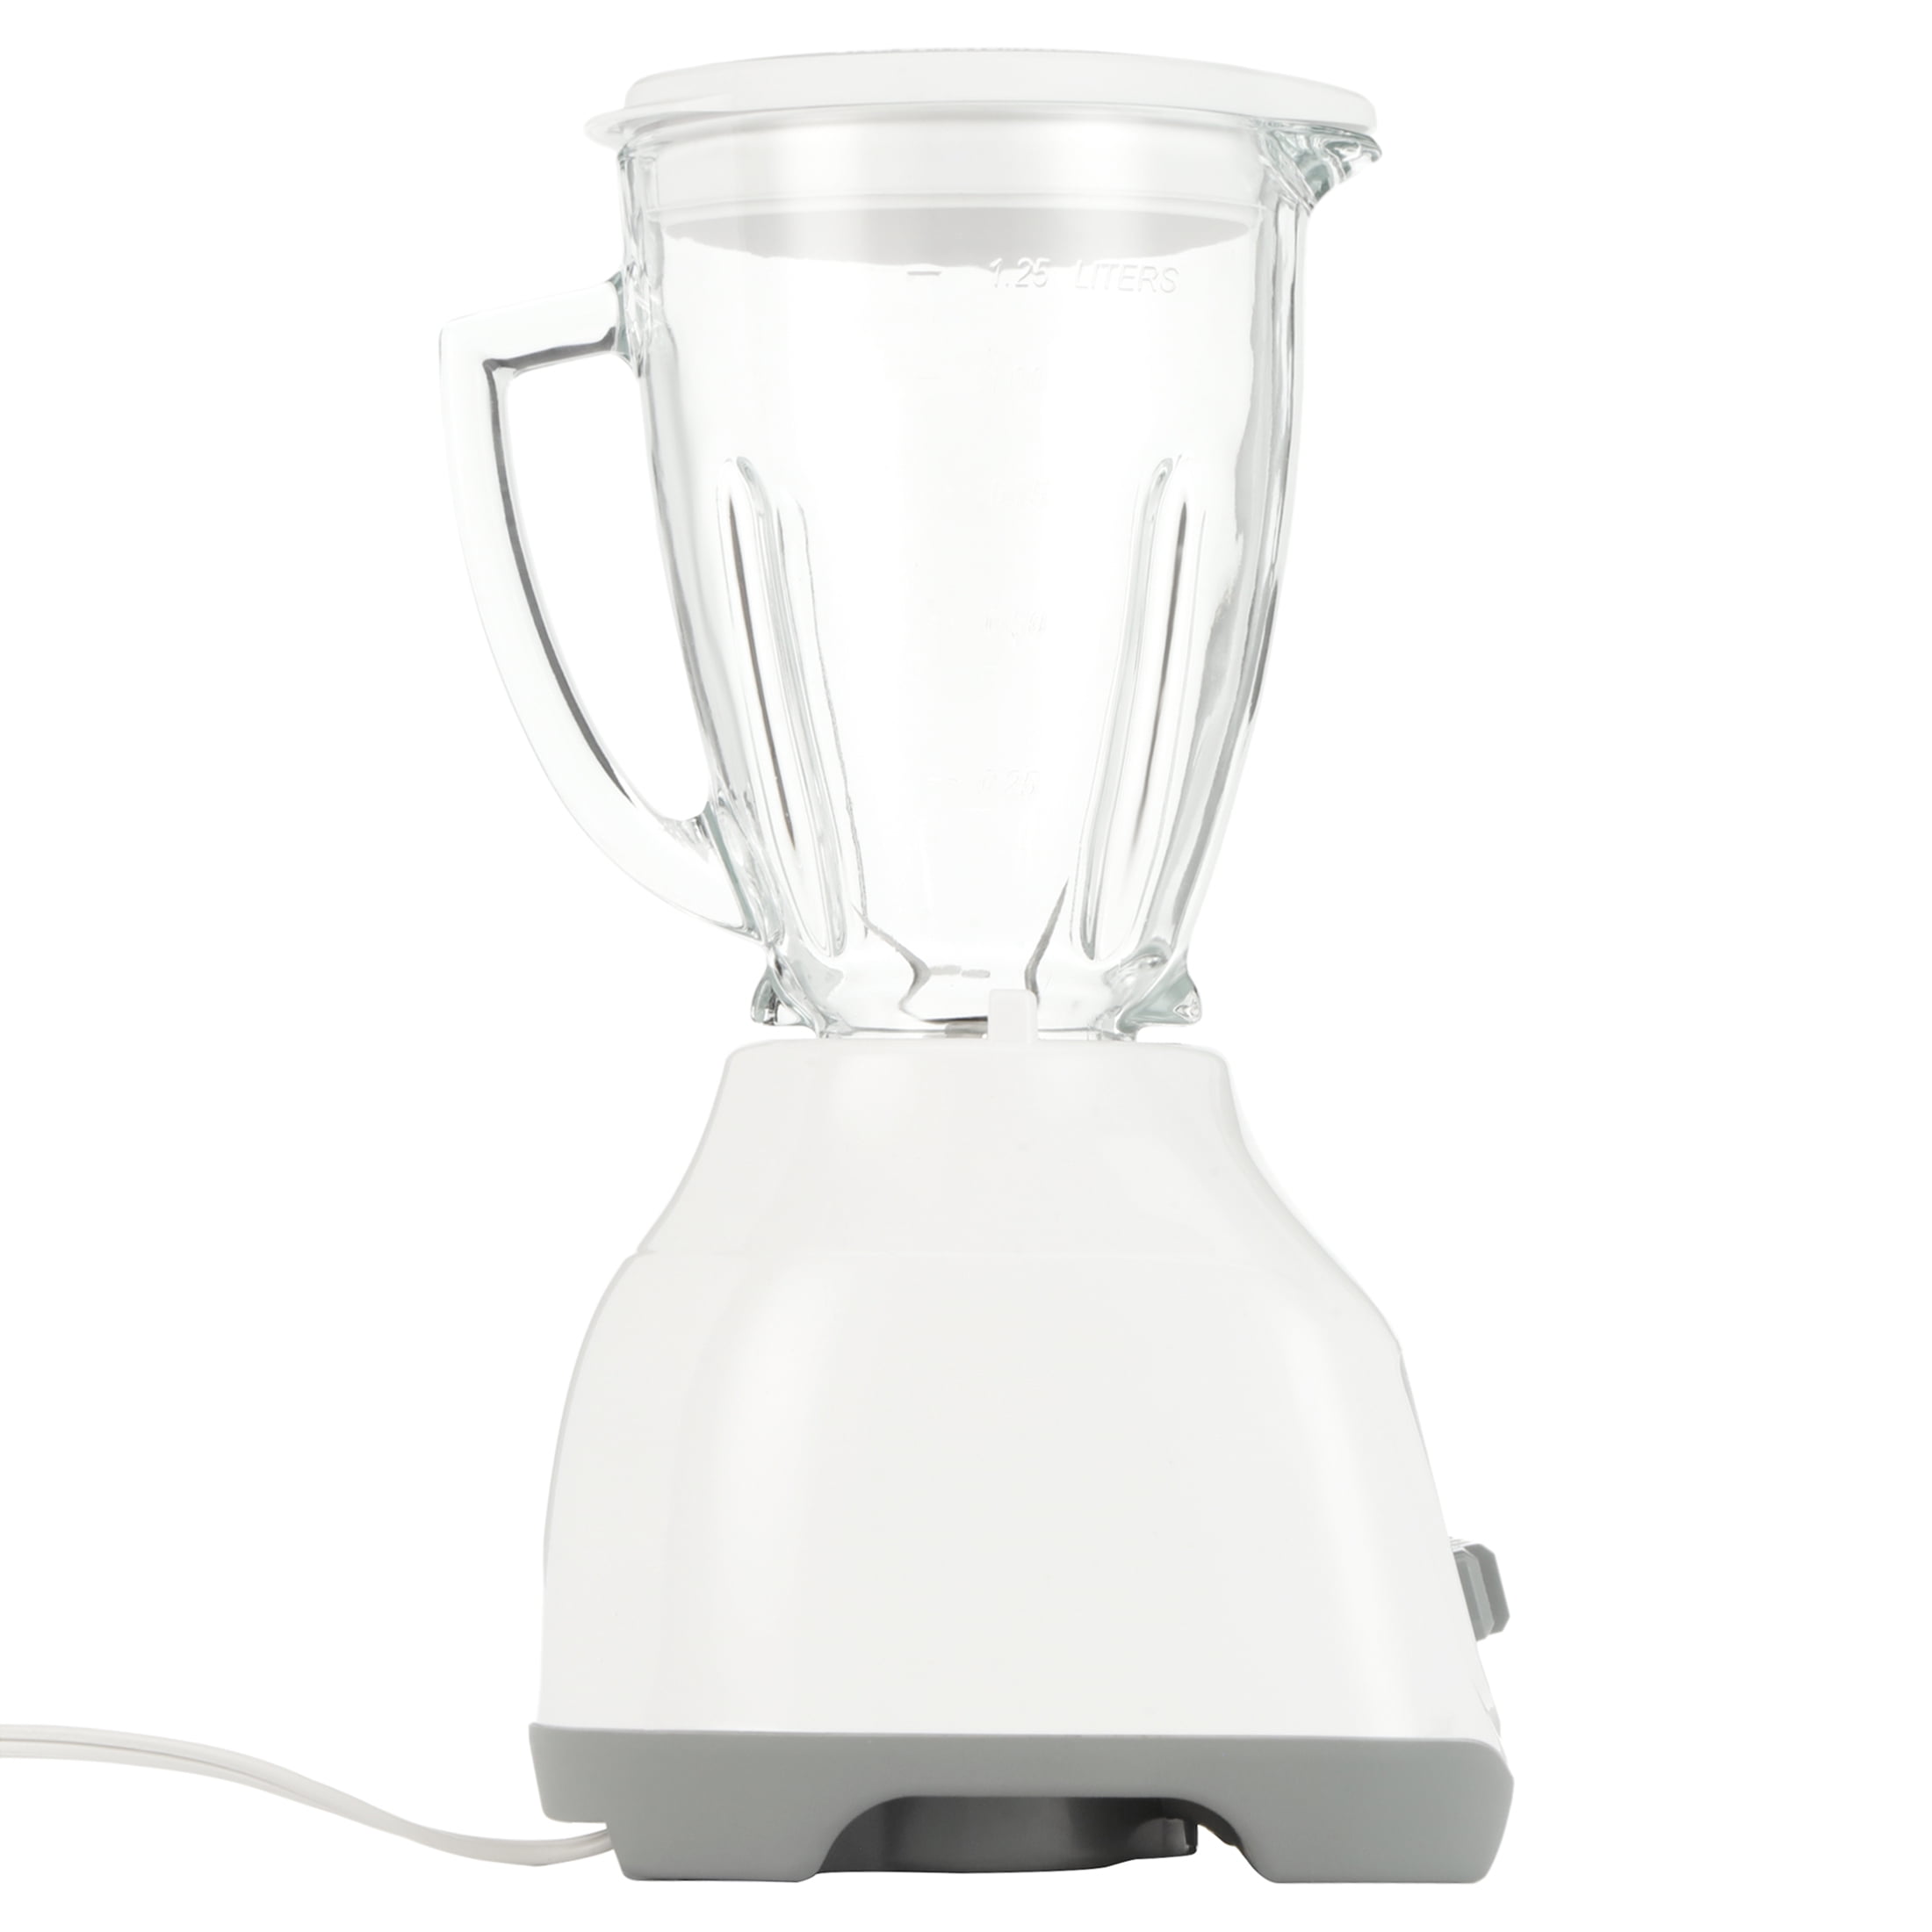 Oster® Pro 1200 Blender with 3 Pre-Programmed Settings, Blend-N-Go™ Cup and  5-Cup Food Processor, Brushed Nickel